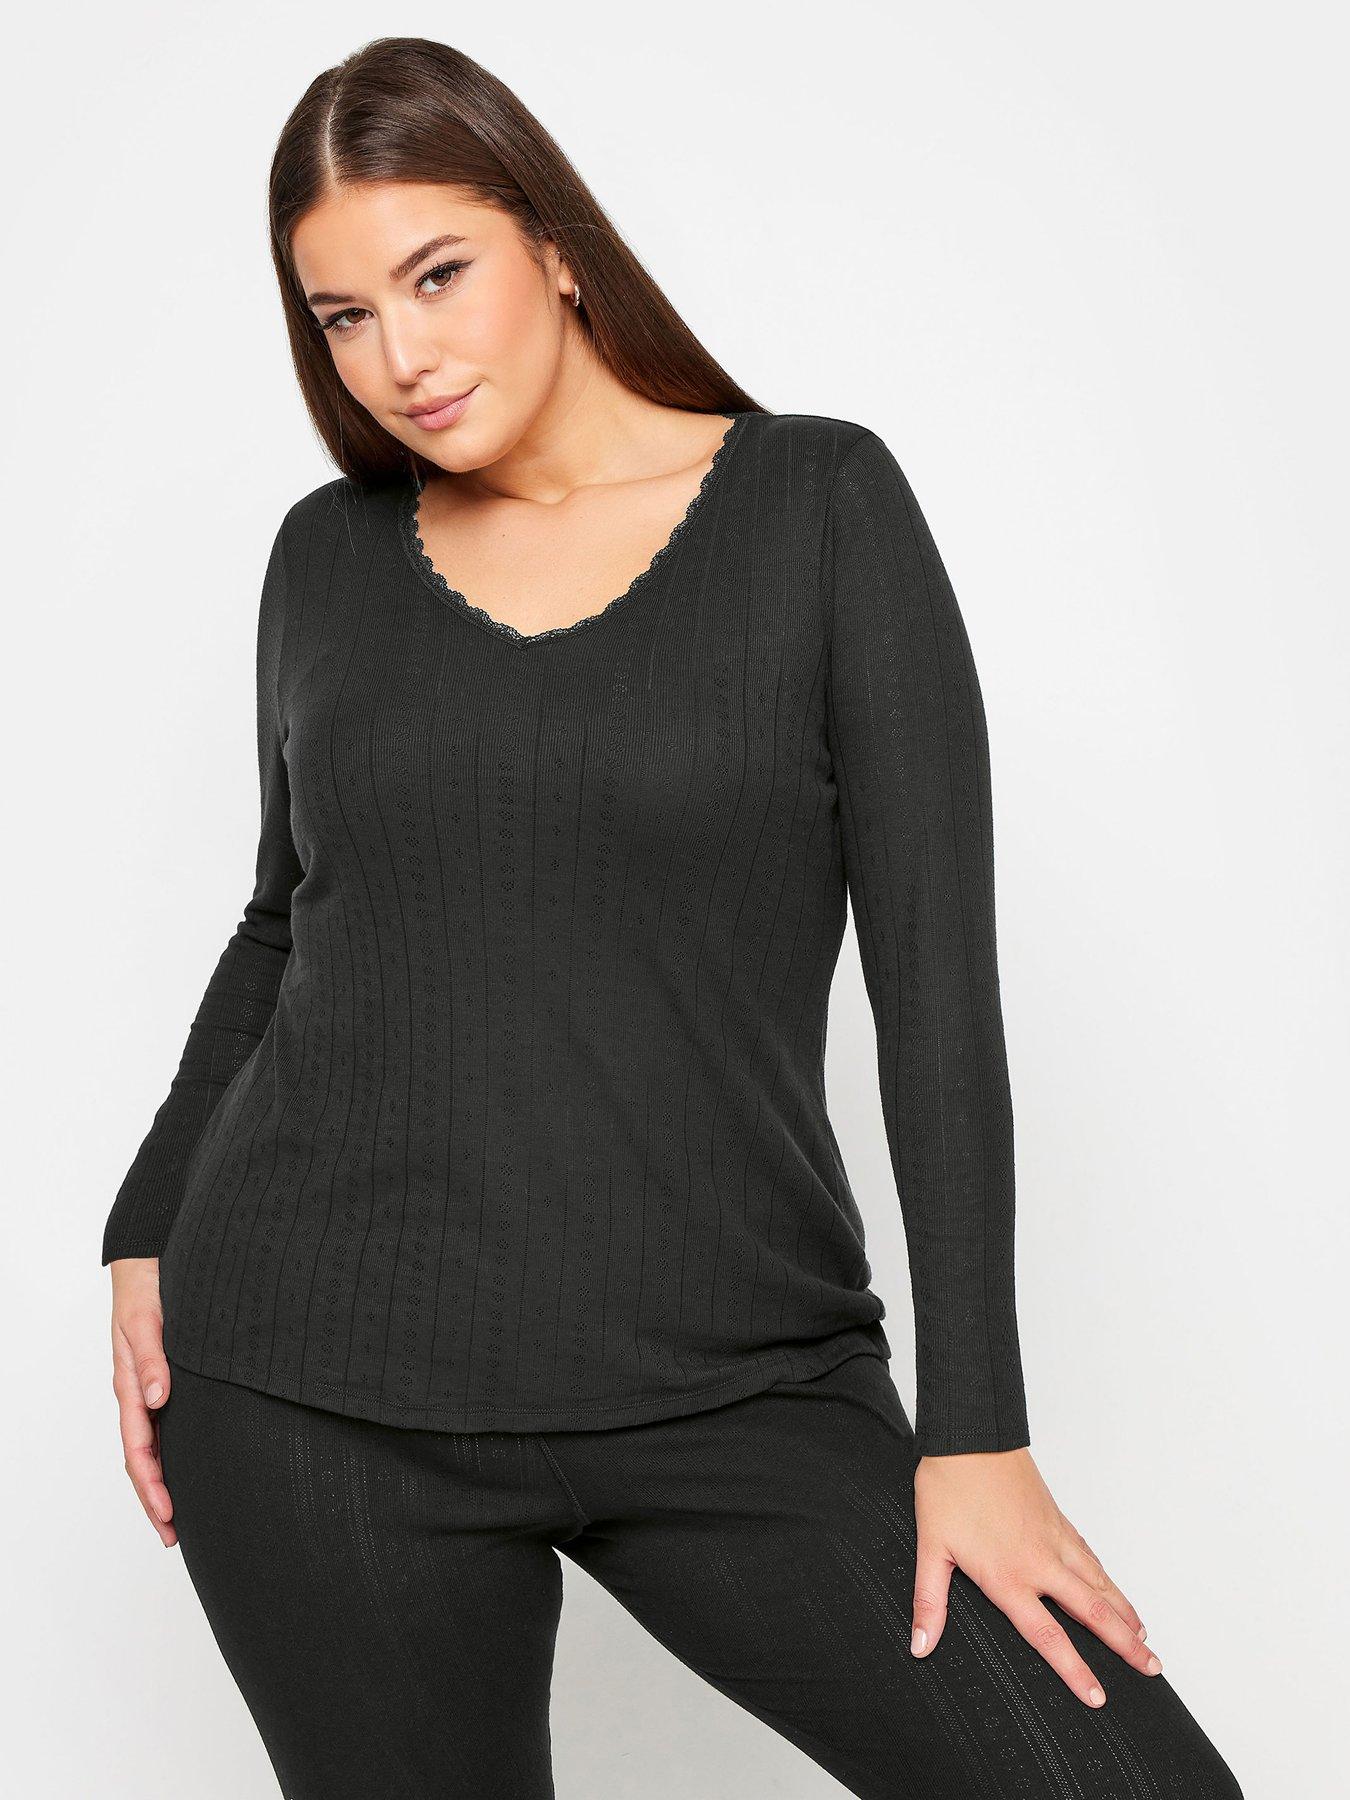 YOURS Plus Size Black Pointelle Thermal Vest Top